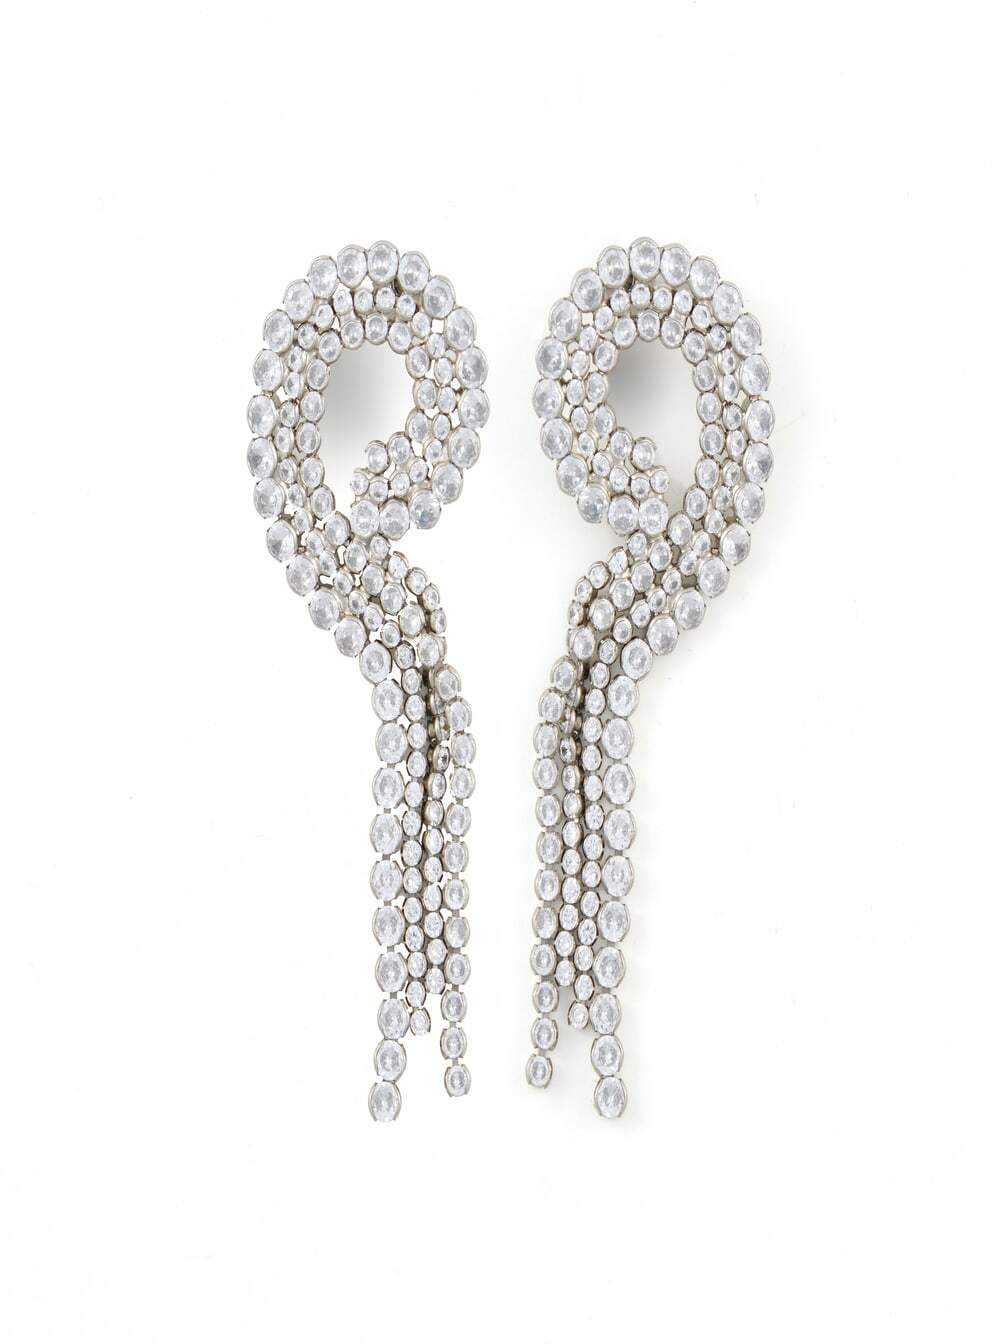 Silvia Gnecchi Atlantis Earrings With Applied Crystals in metallic